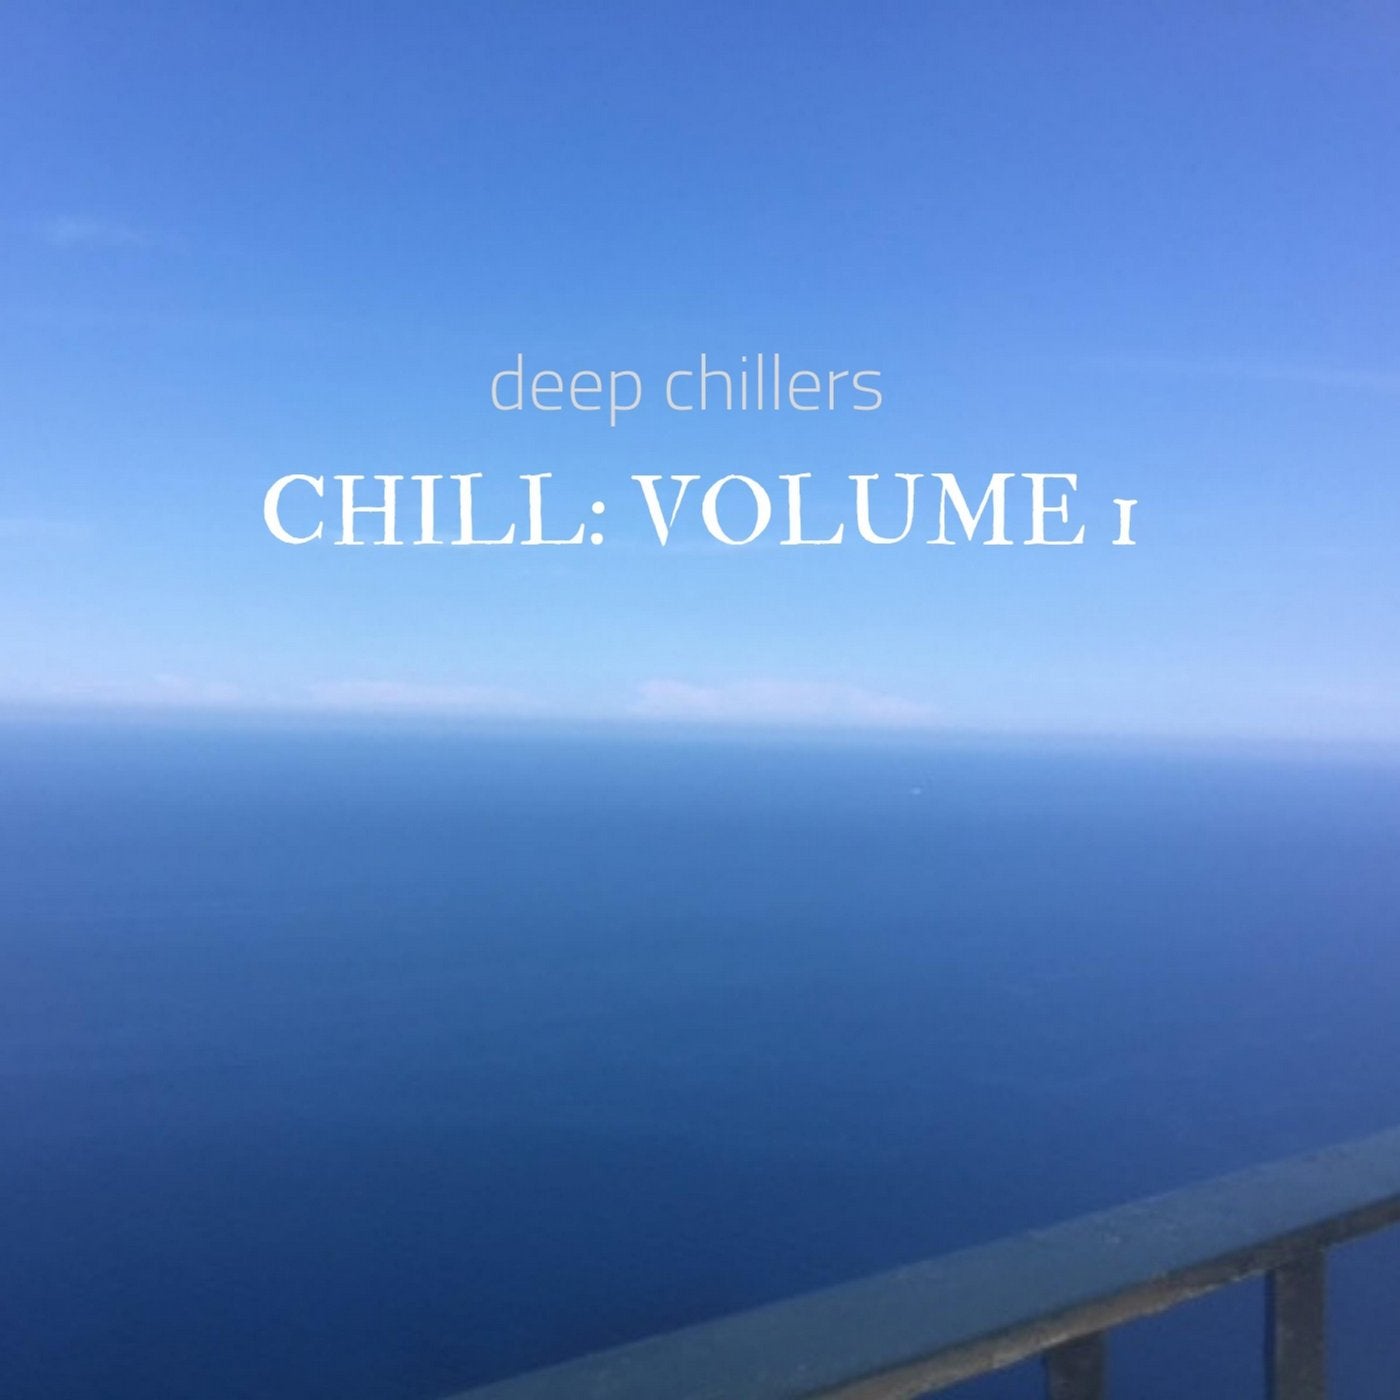 Chill мм2. Чилл ви. Typical Chill Song. Deep Chillers - simp.